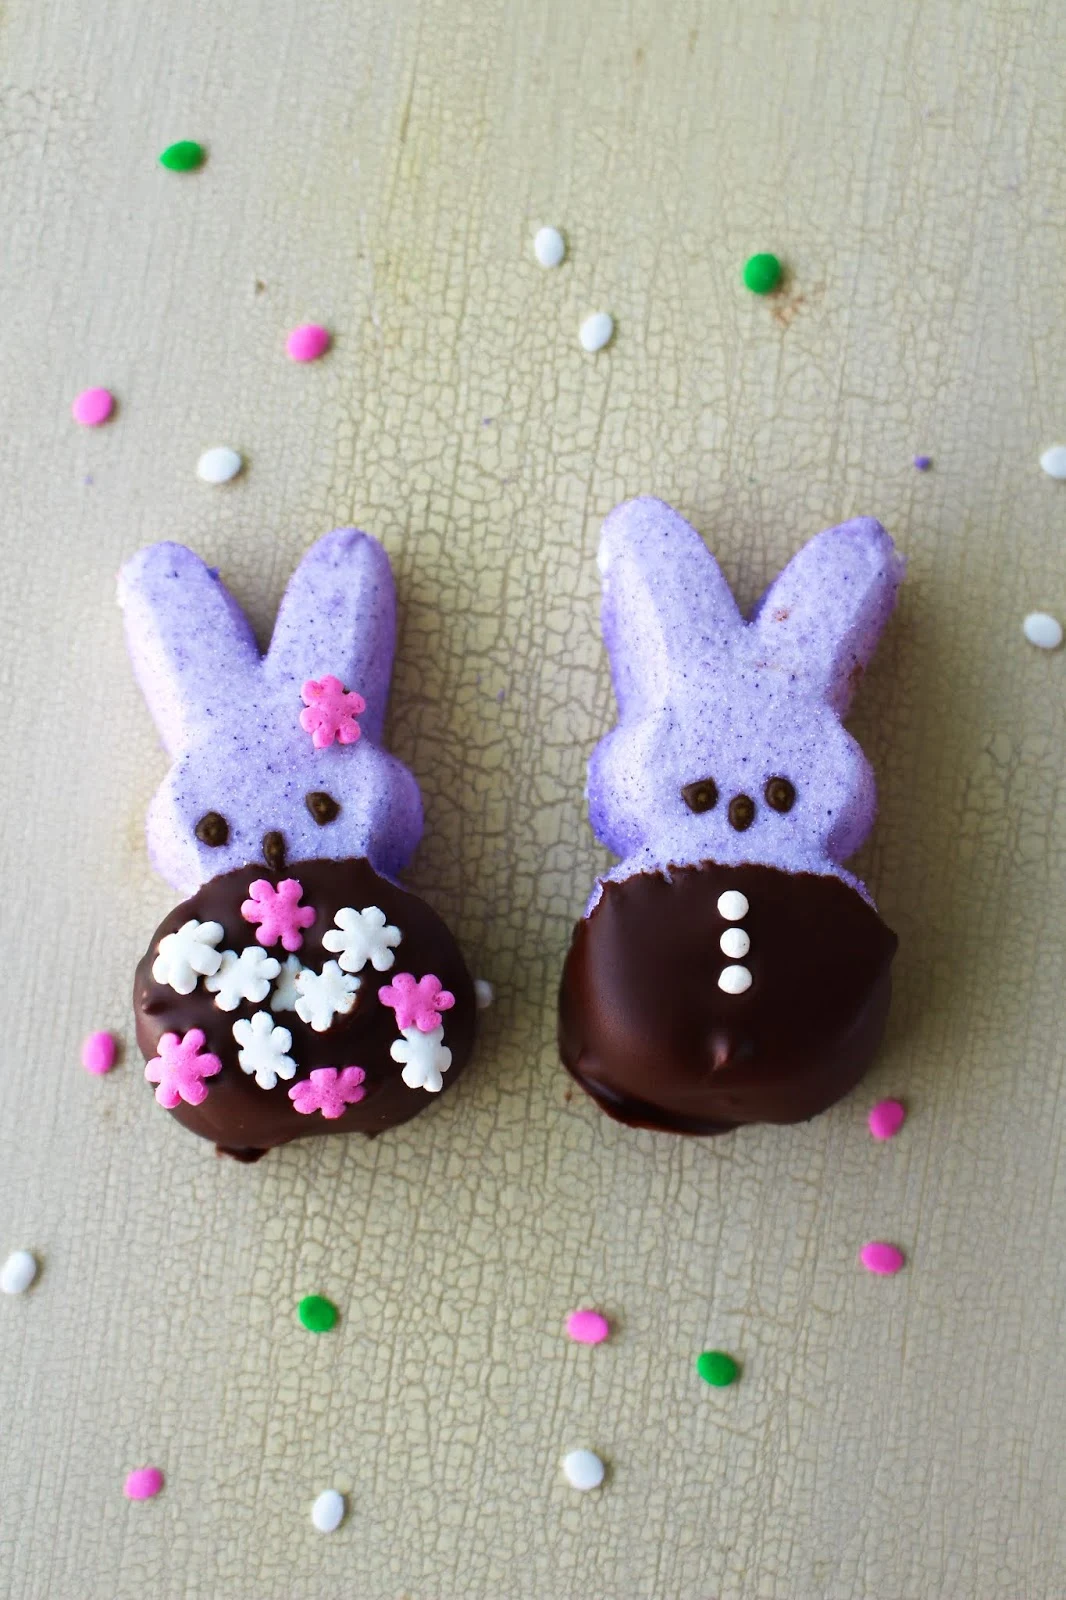 Chocolate Covered Peeps take your favorite Easter marshmallow treats up a notch by dipping them in an irresistible chocolate coating. You will never want to eat them any other way again! #Easter #peeps #dessert